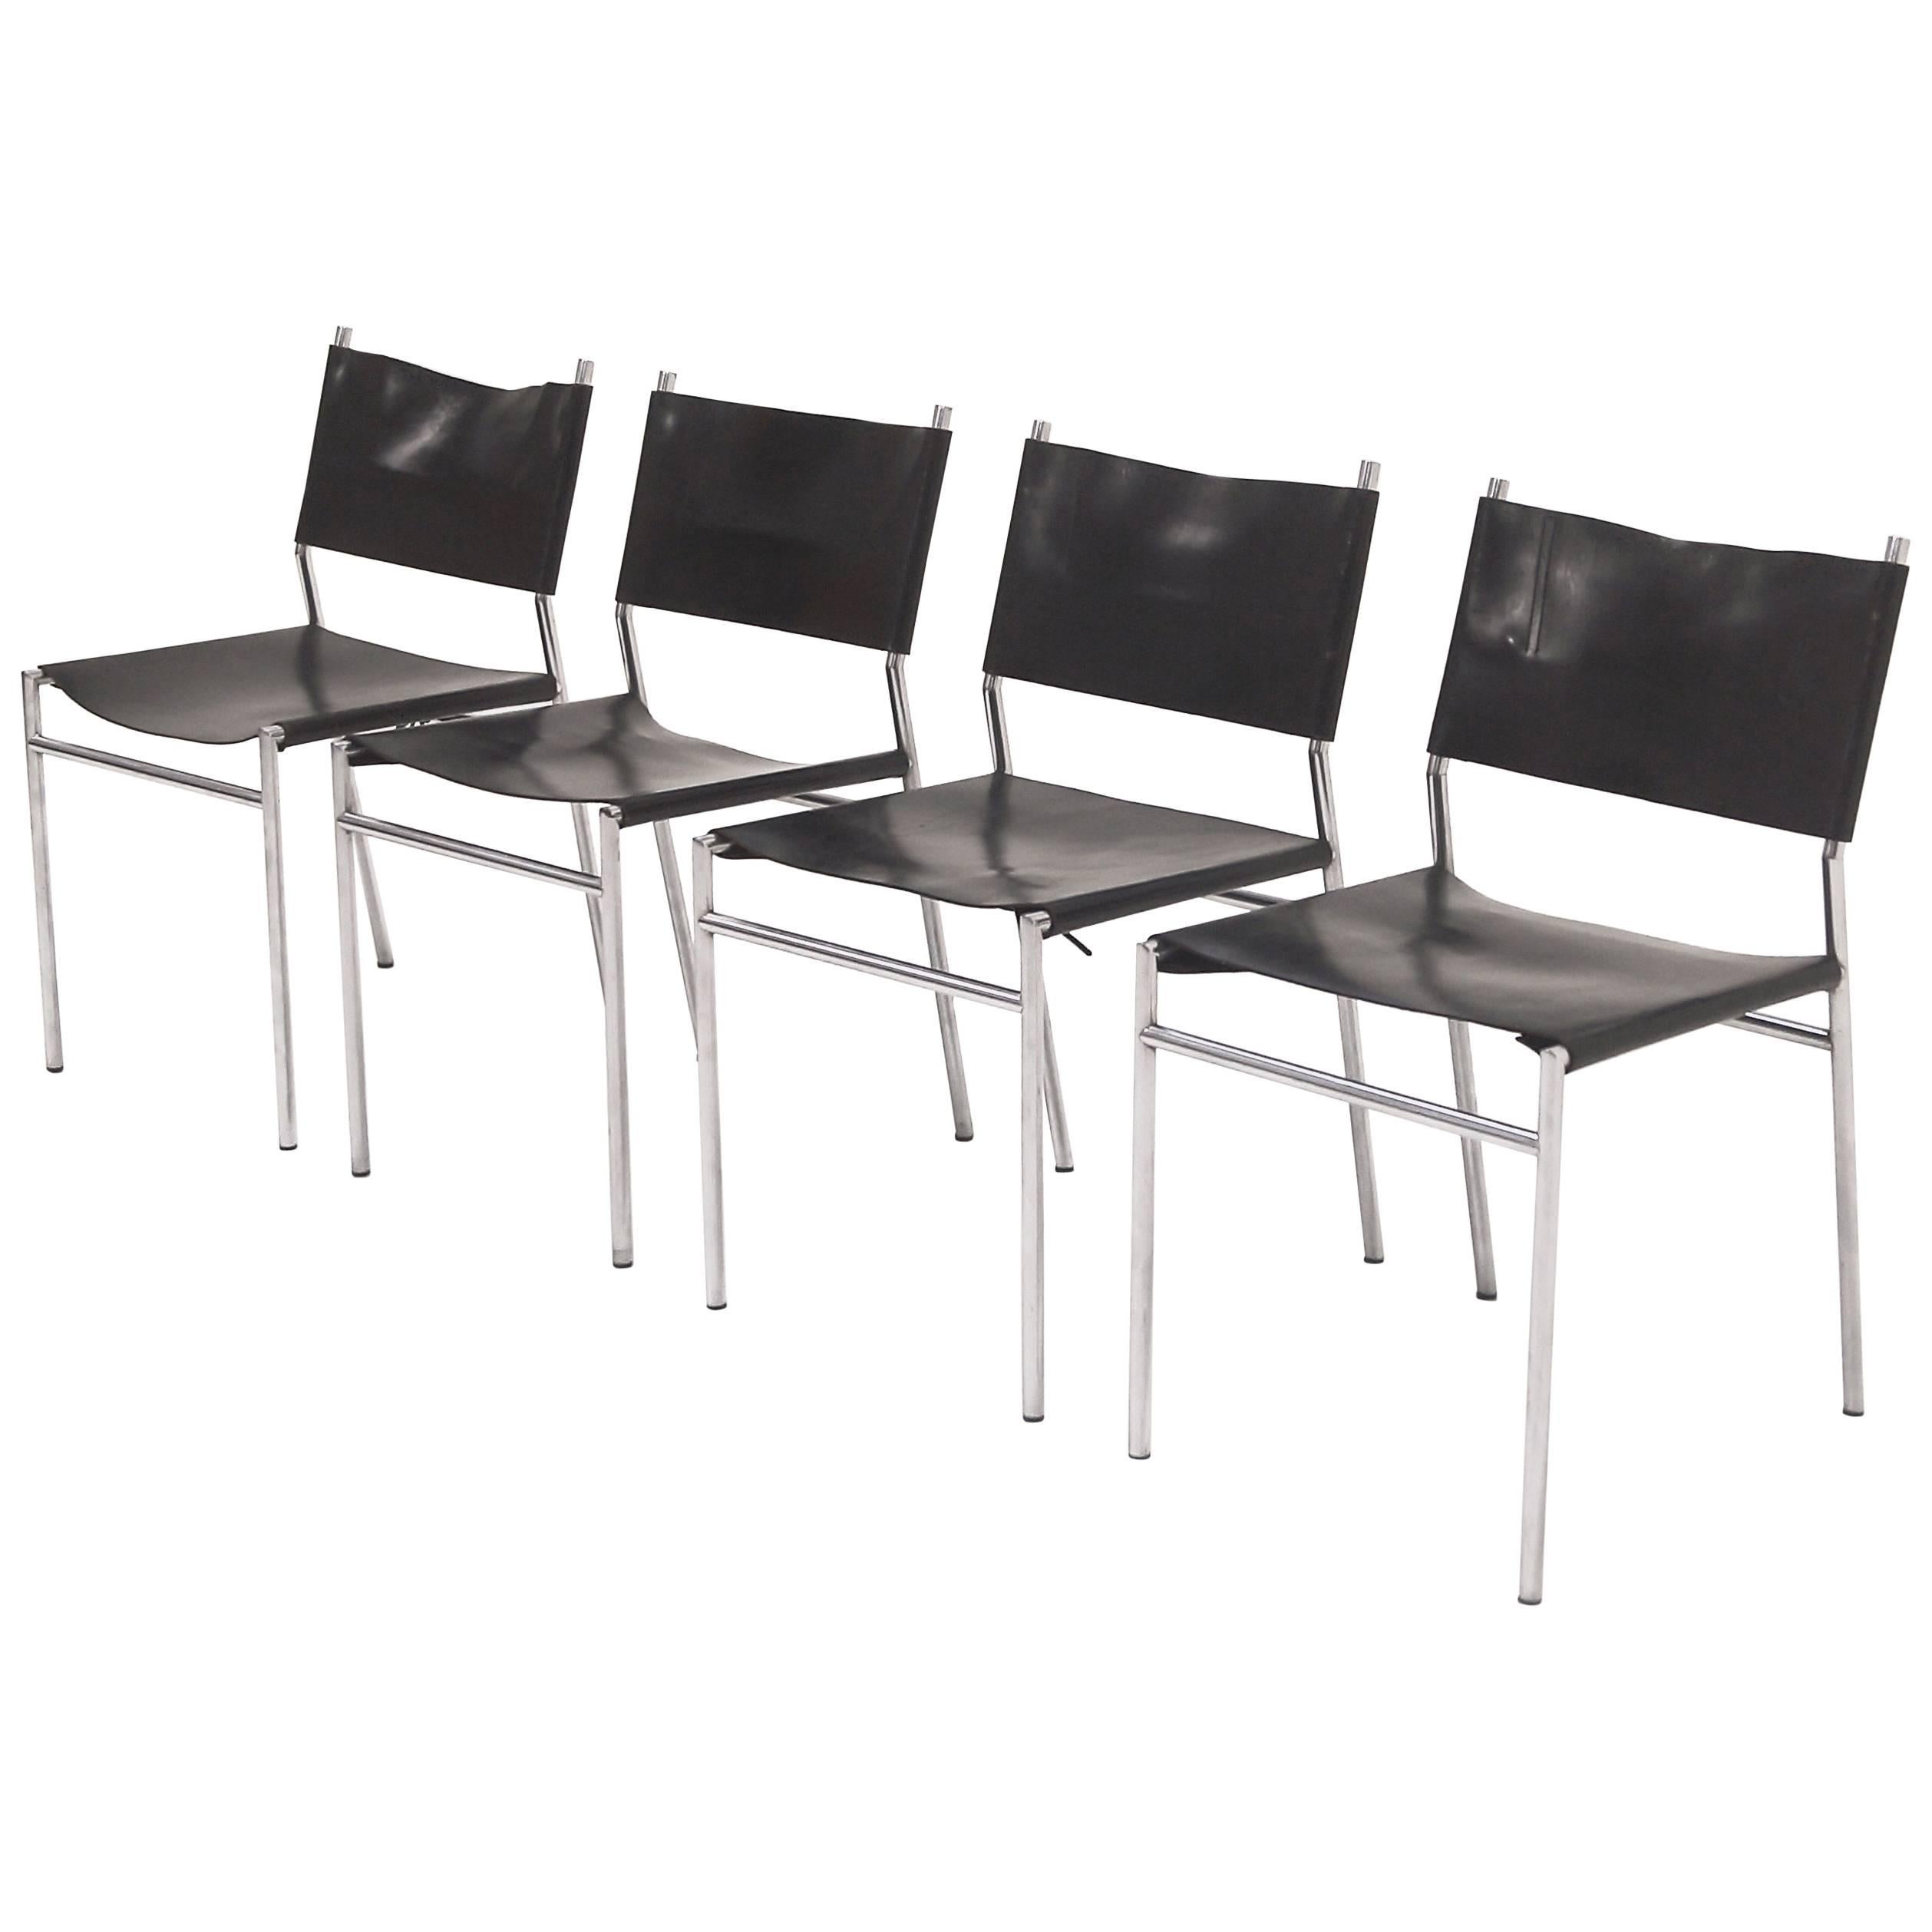 Set of Four Martin Visser Dining Chairs in Black Leather for 'T Spectrum, 1960s For Sale